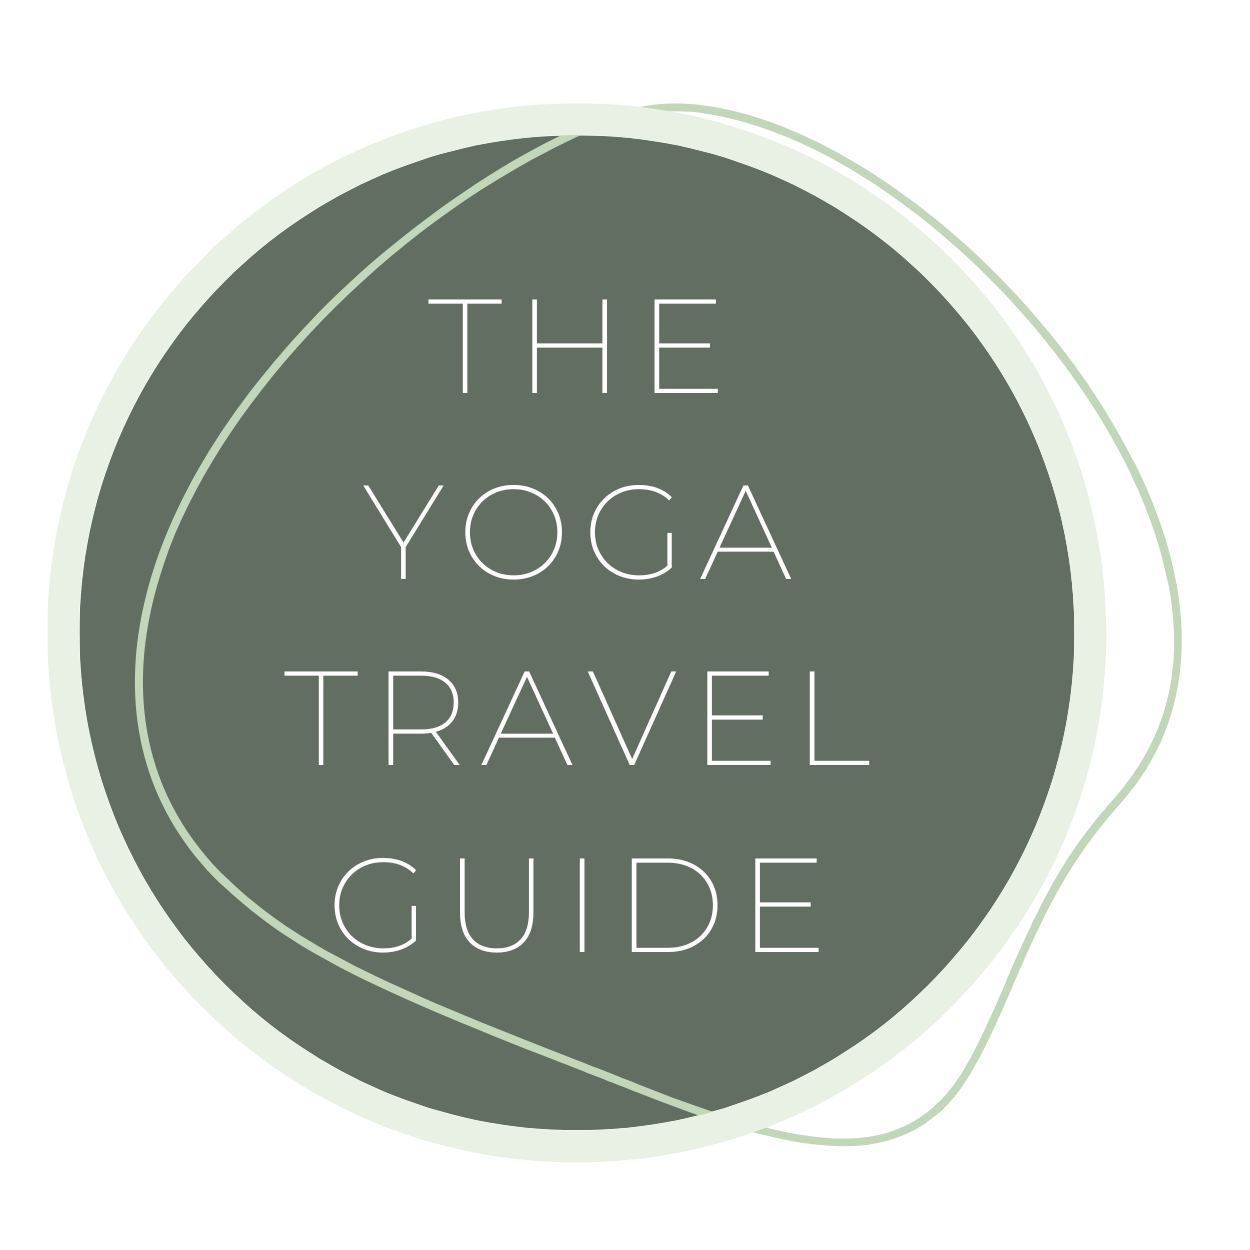 THE YOGA TRAVEL GUIDE